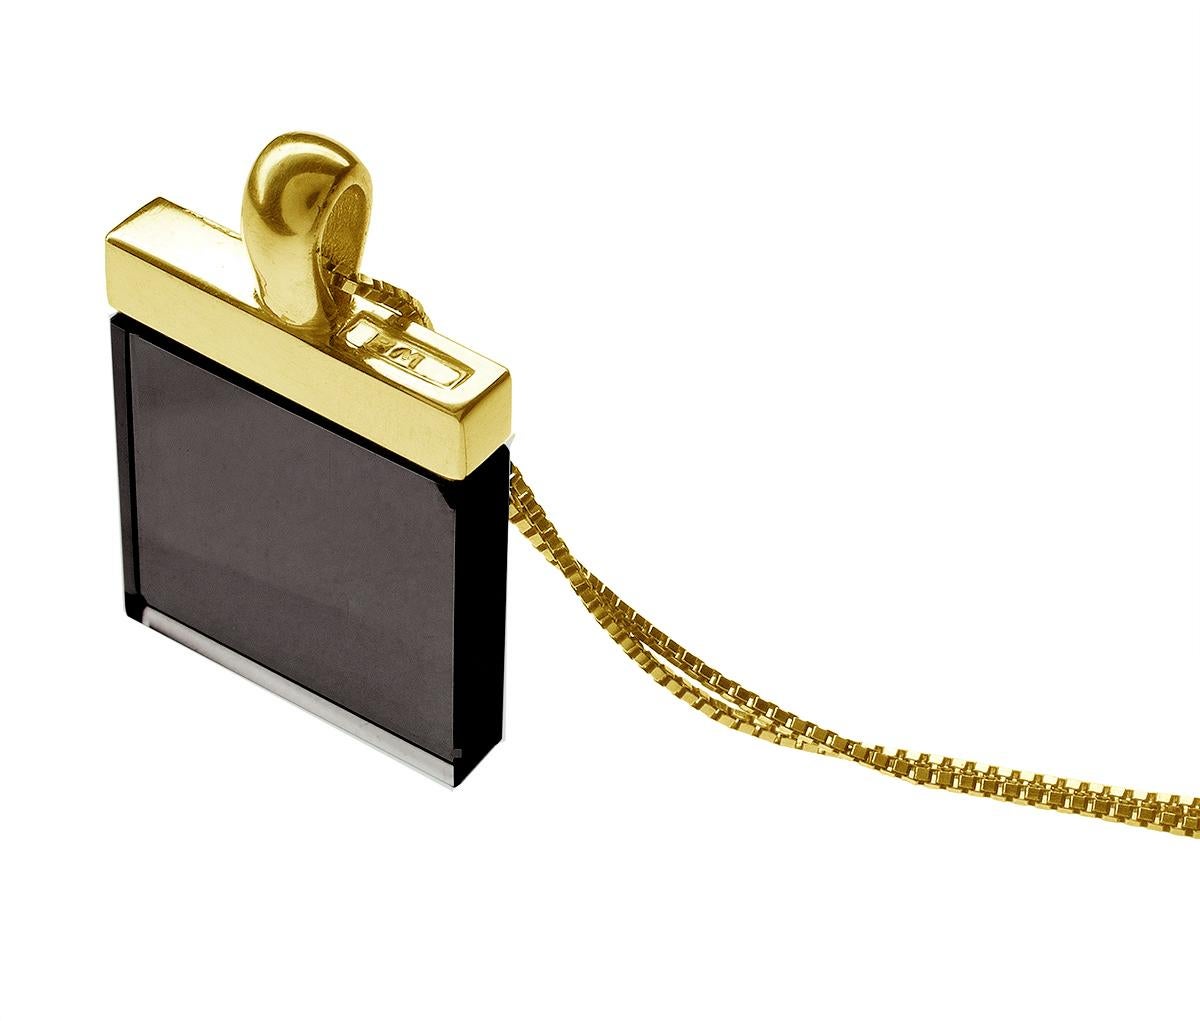 The Ink collection, designed by Berlin-based oil painter Polya Medvedeva, has been featured in both Harper's Bazaar and Vogue UA. This pendant, part of the collection, is crafted from 14 karat yellow gold and features a 15x15x3 mm dark smoky quartz